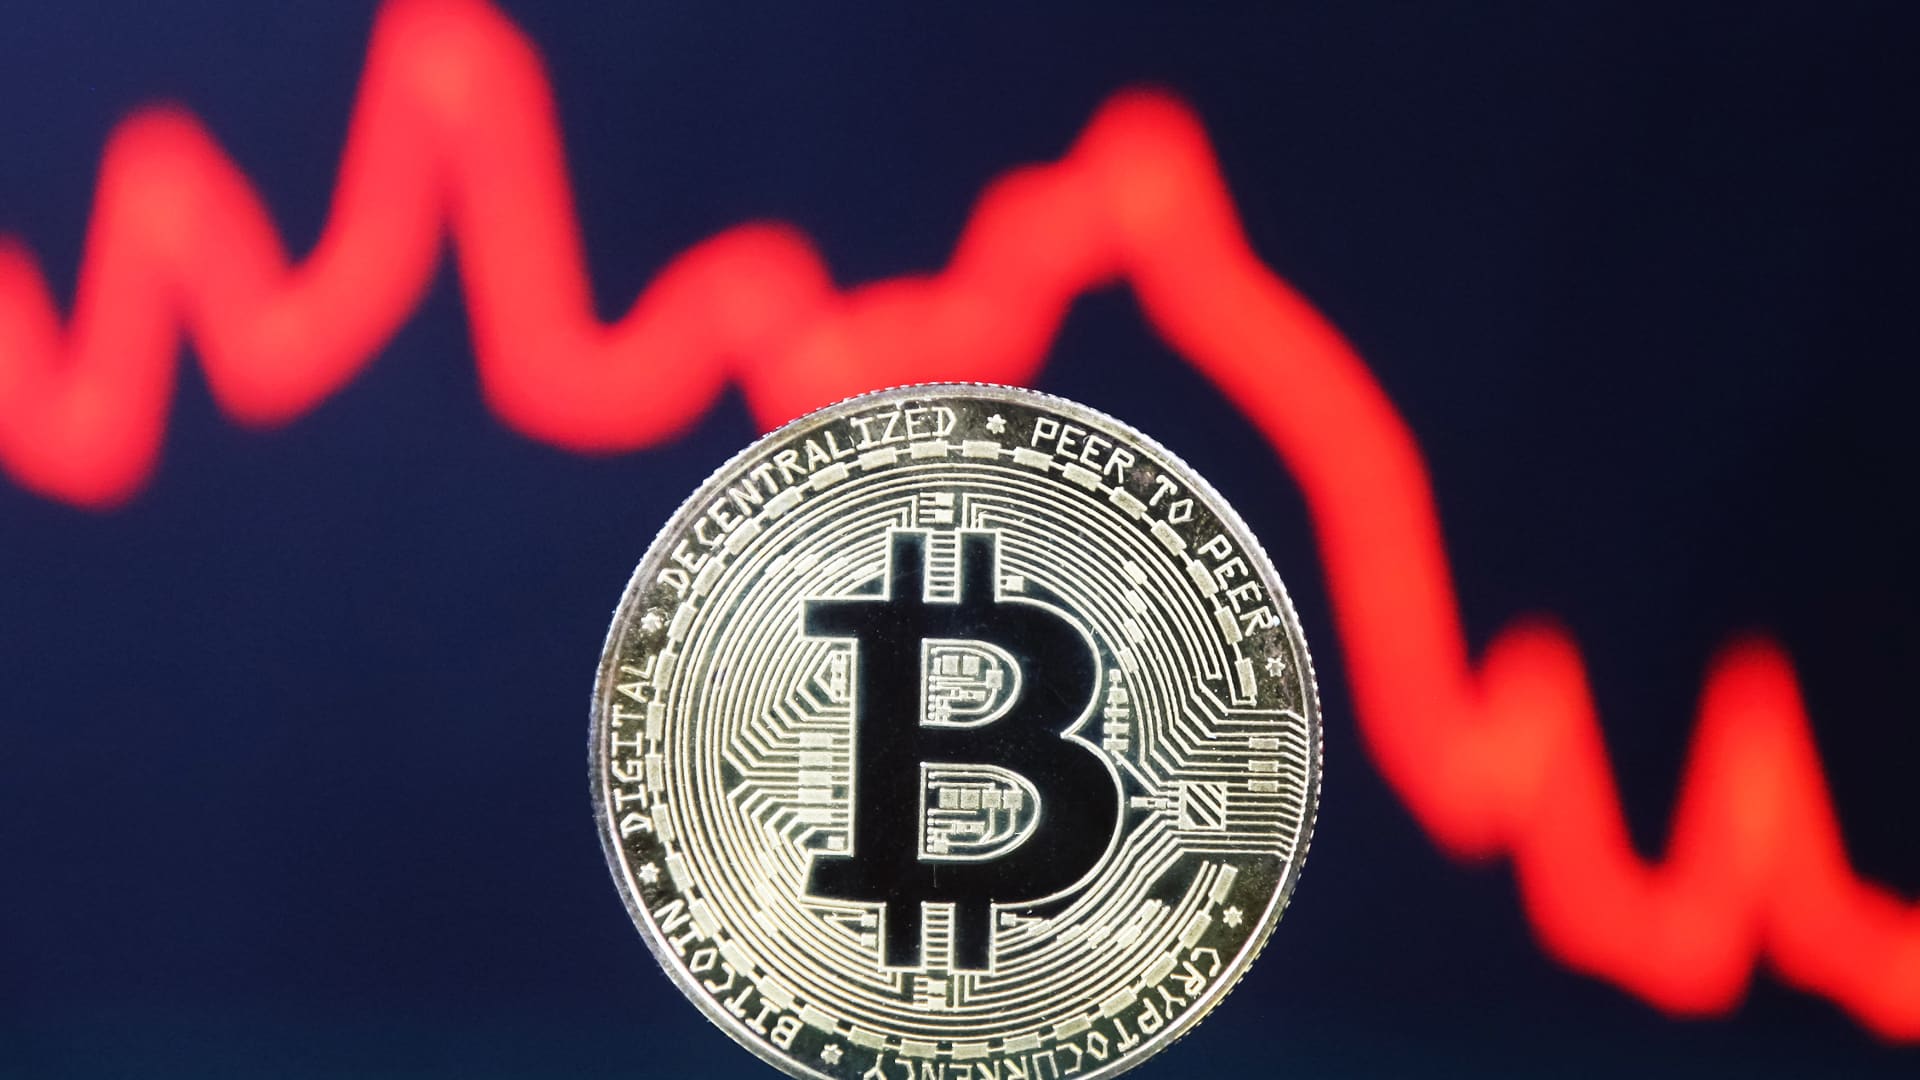 The boldest bitcoin price predictions for 2023